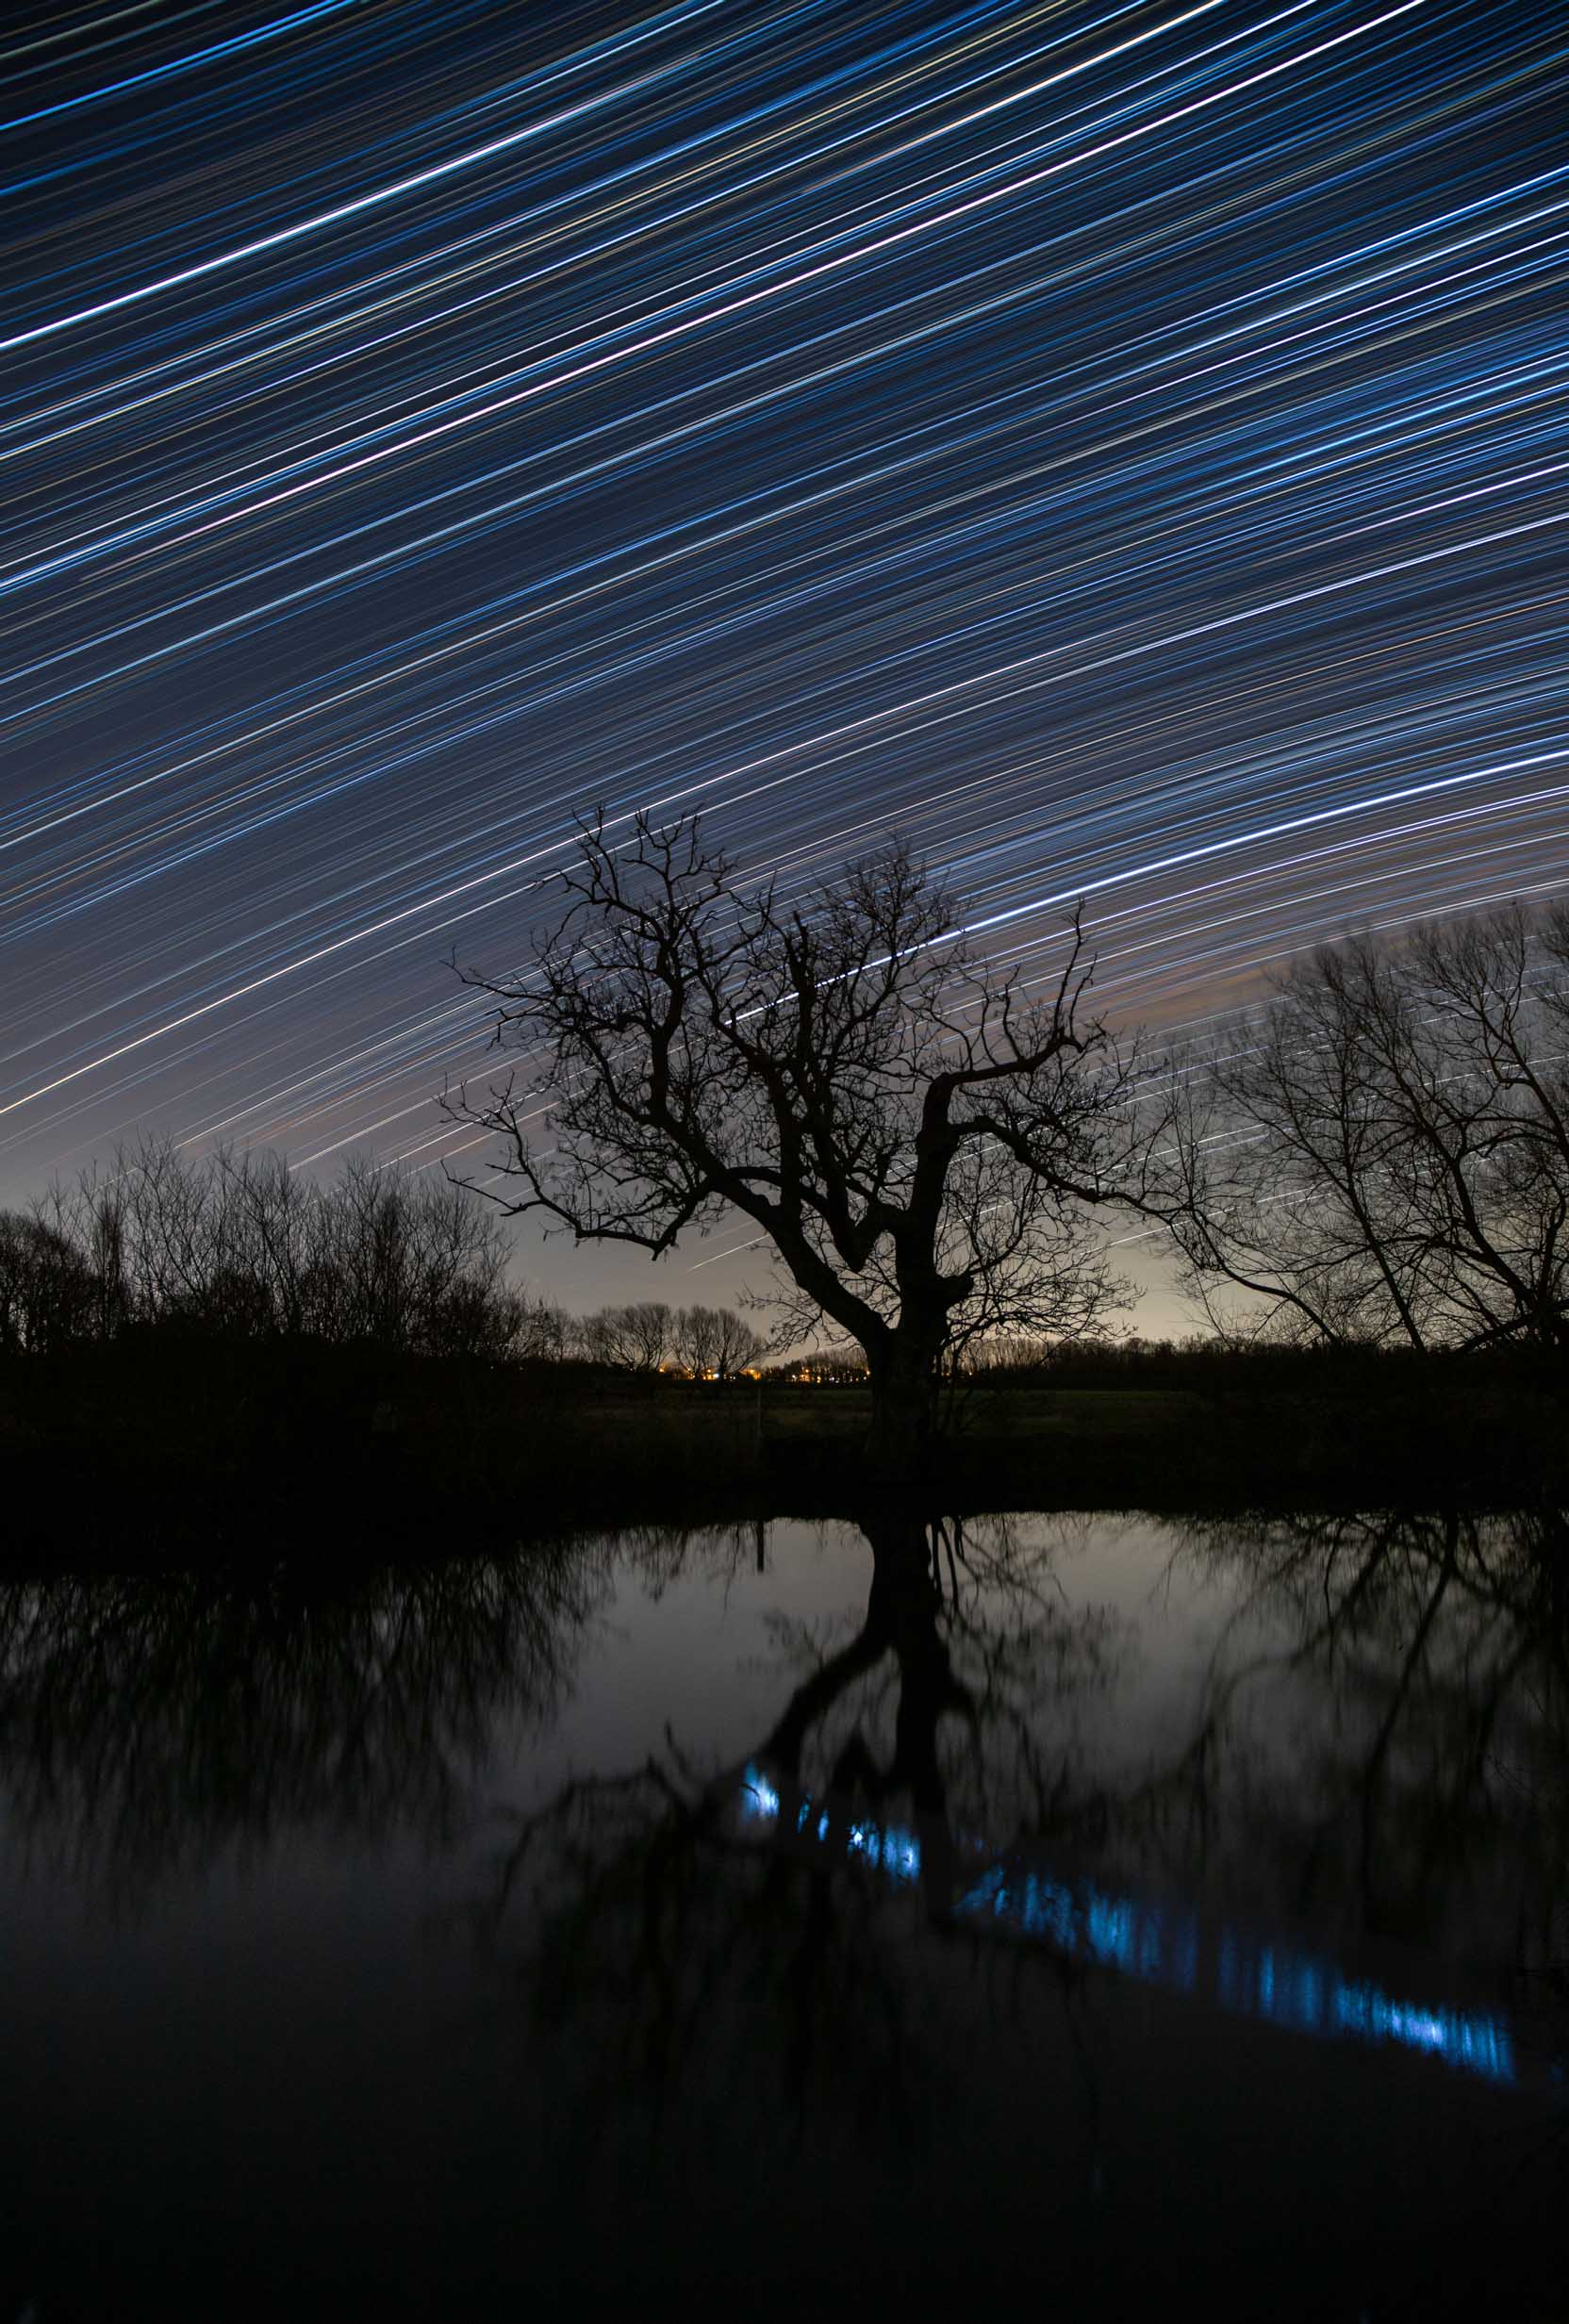 My first attempt at star trails, in February 2022, proved a surprising success. Four hours of trails, from 7pm to 11pm was all I could bear in the cold, but the composition with the so called 'jumping tree', and trails diverging from the equatorial line, worked fabulously.